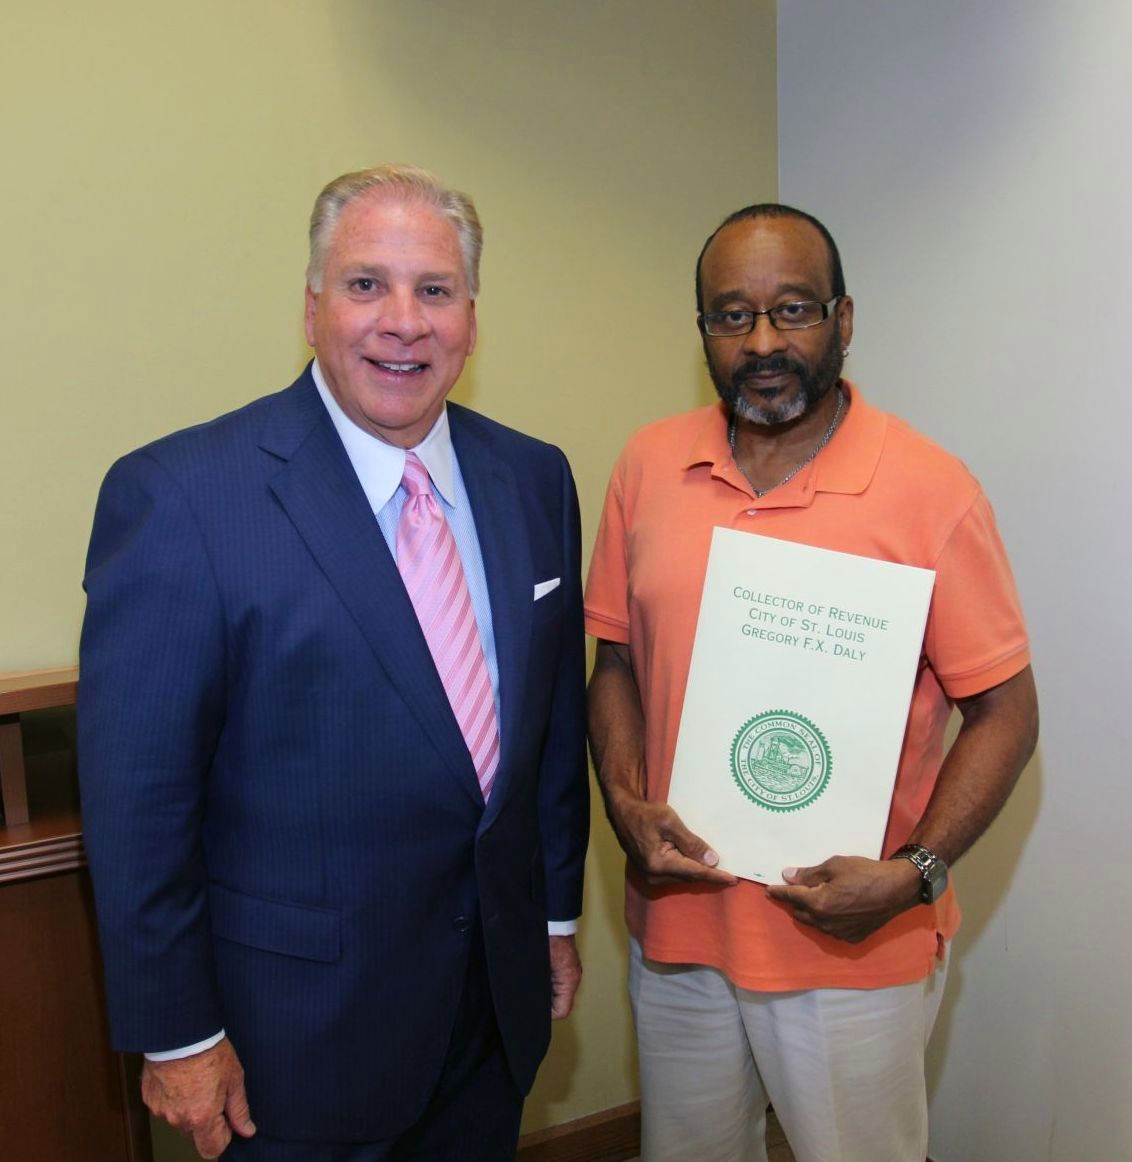 Collector of Revenue Gregory F.X. Daly congratulates David Dickerson on 10 years of service with the Collector's office.